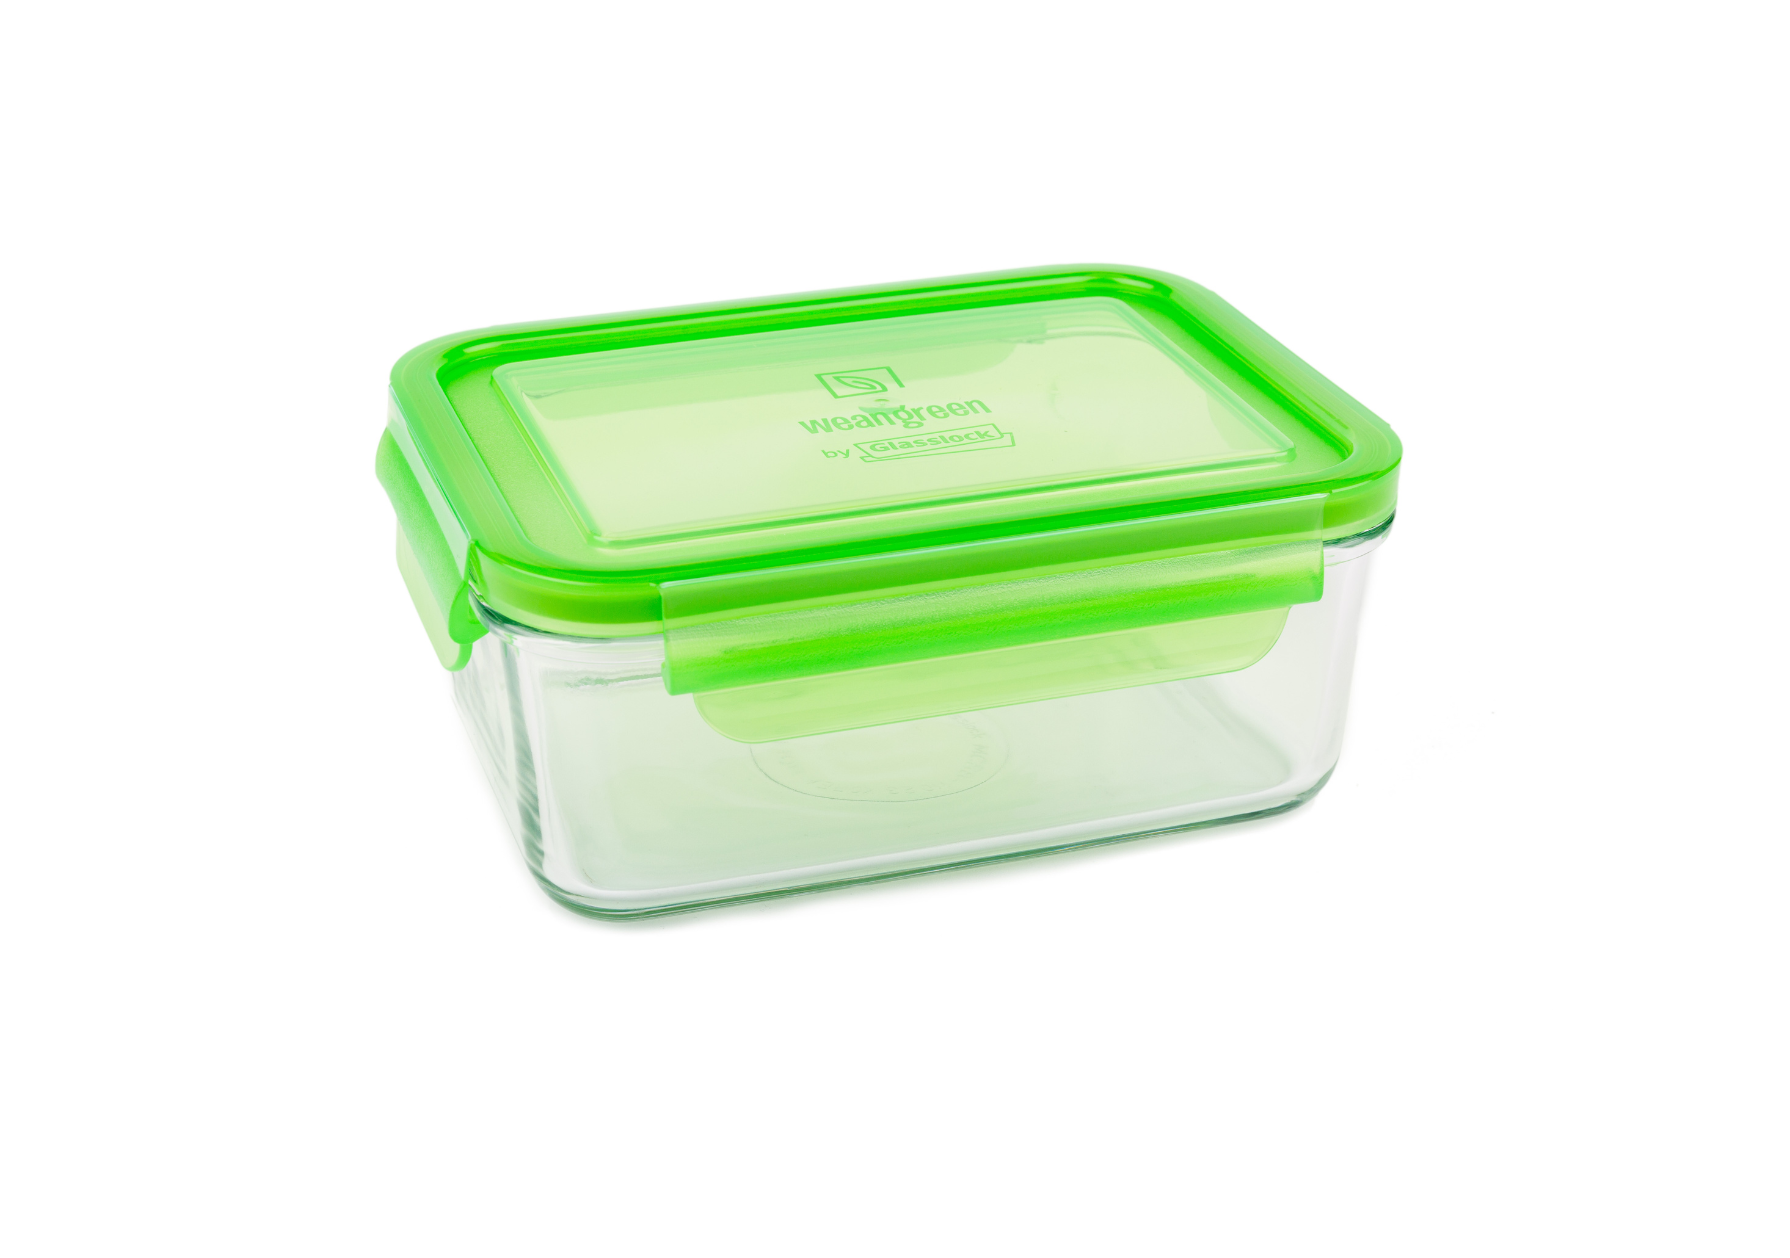 Wean Green Tempered Glass Food Container Pea Green 36oz